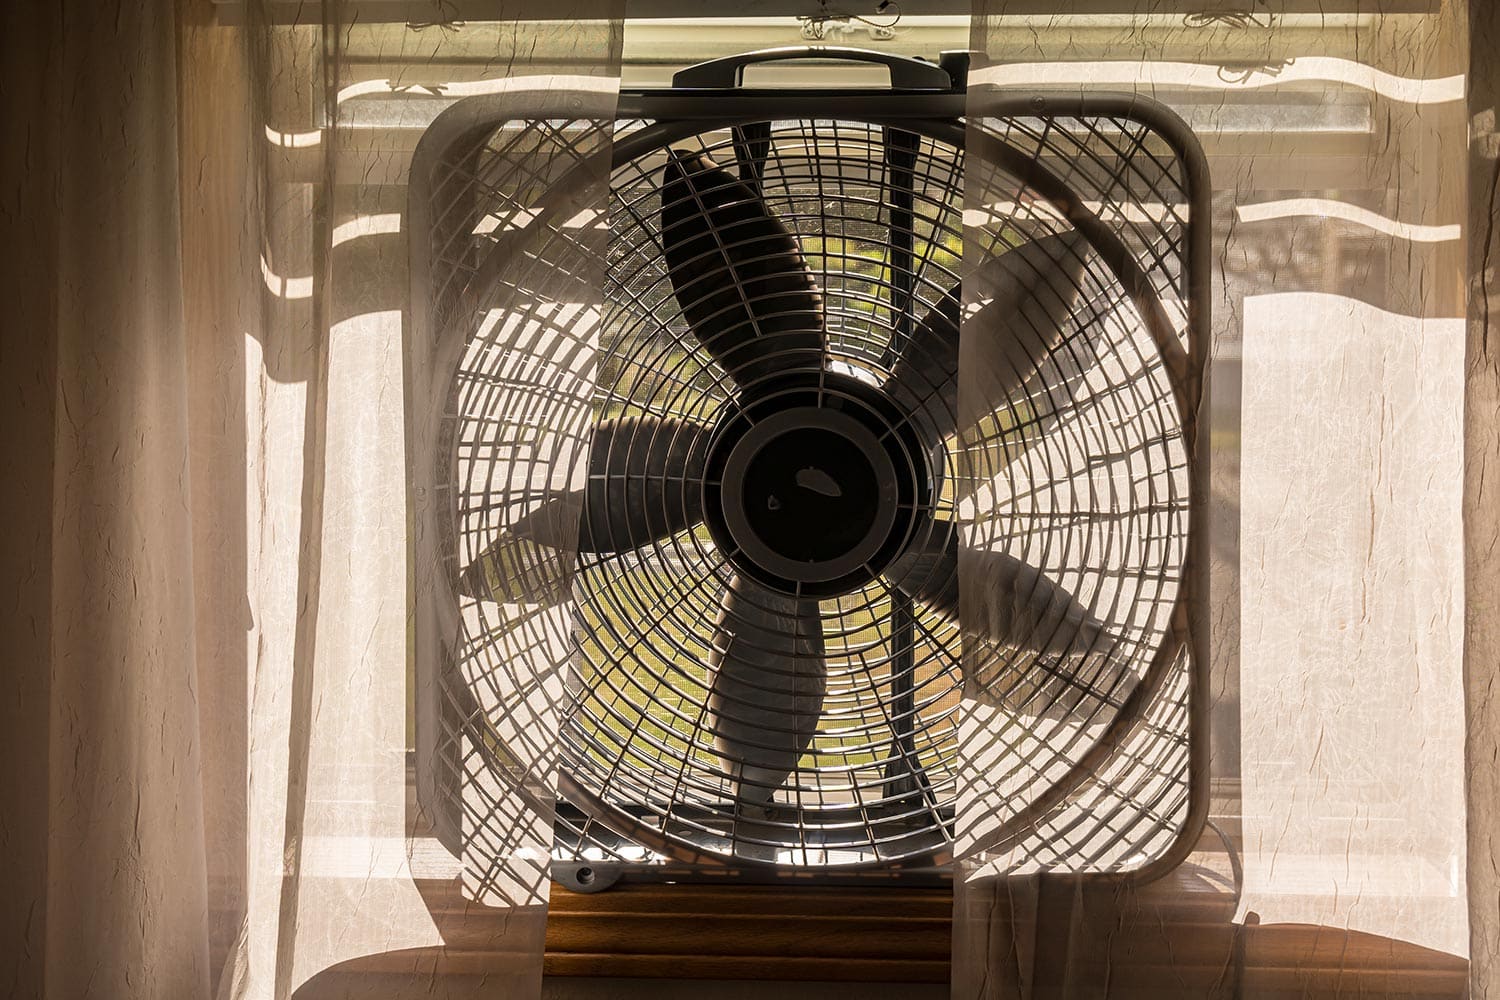 Electric box fan sitting on a window sill with sheer lace curtains